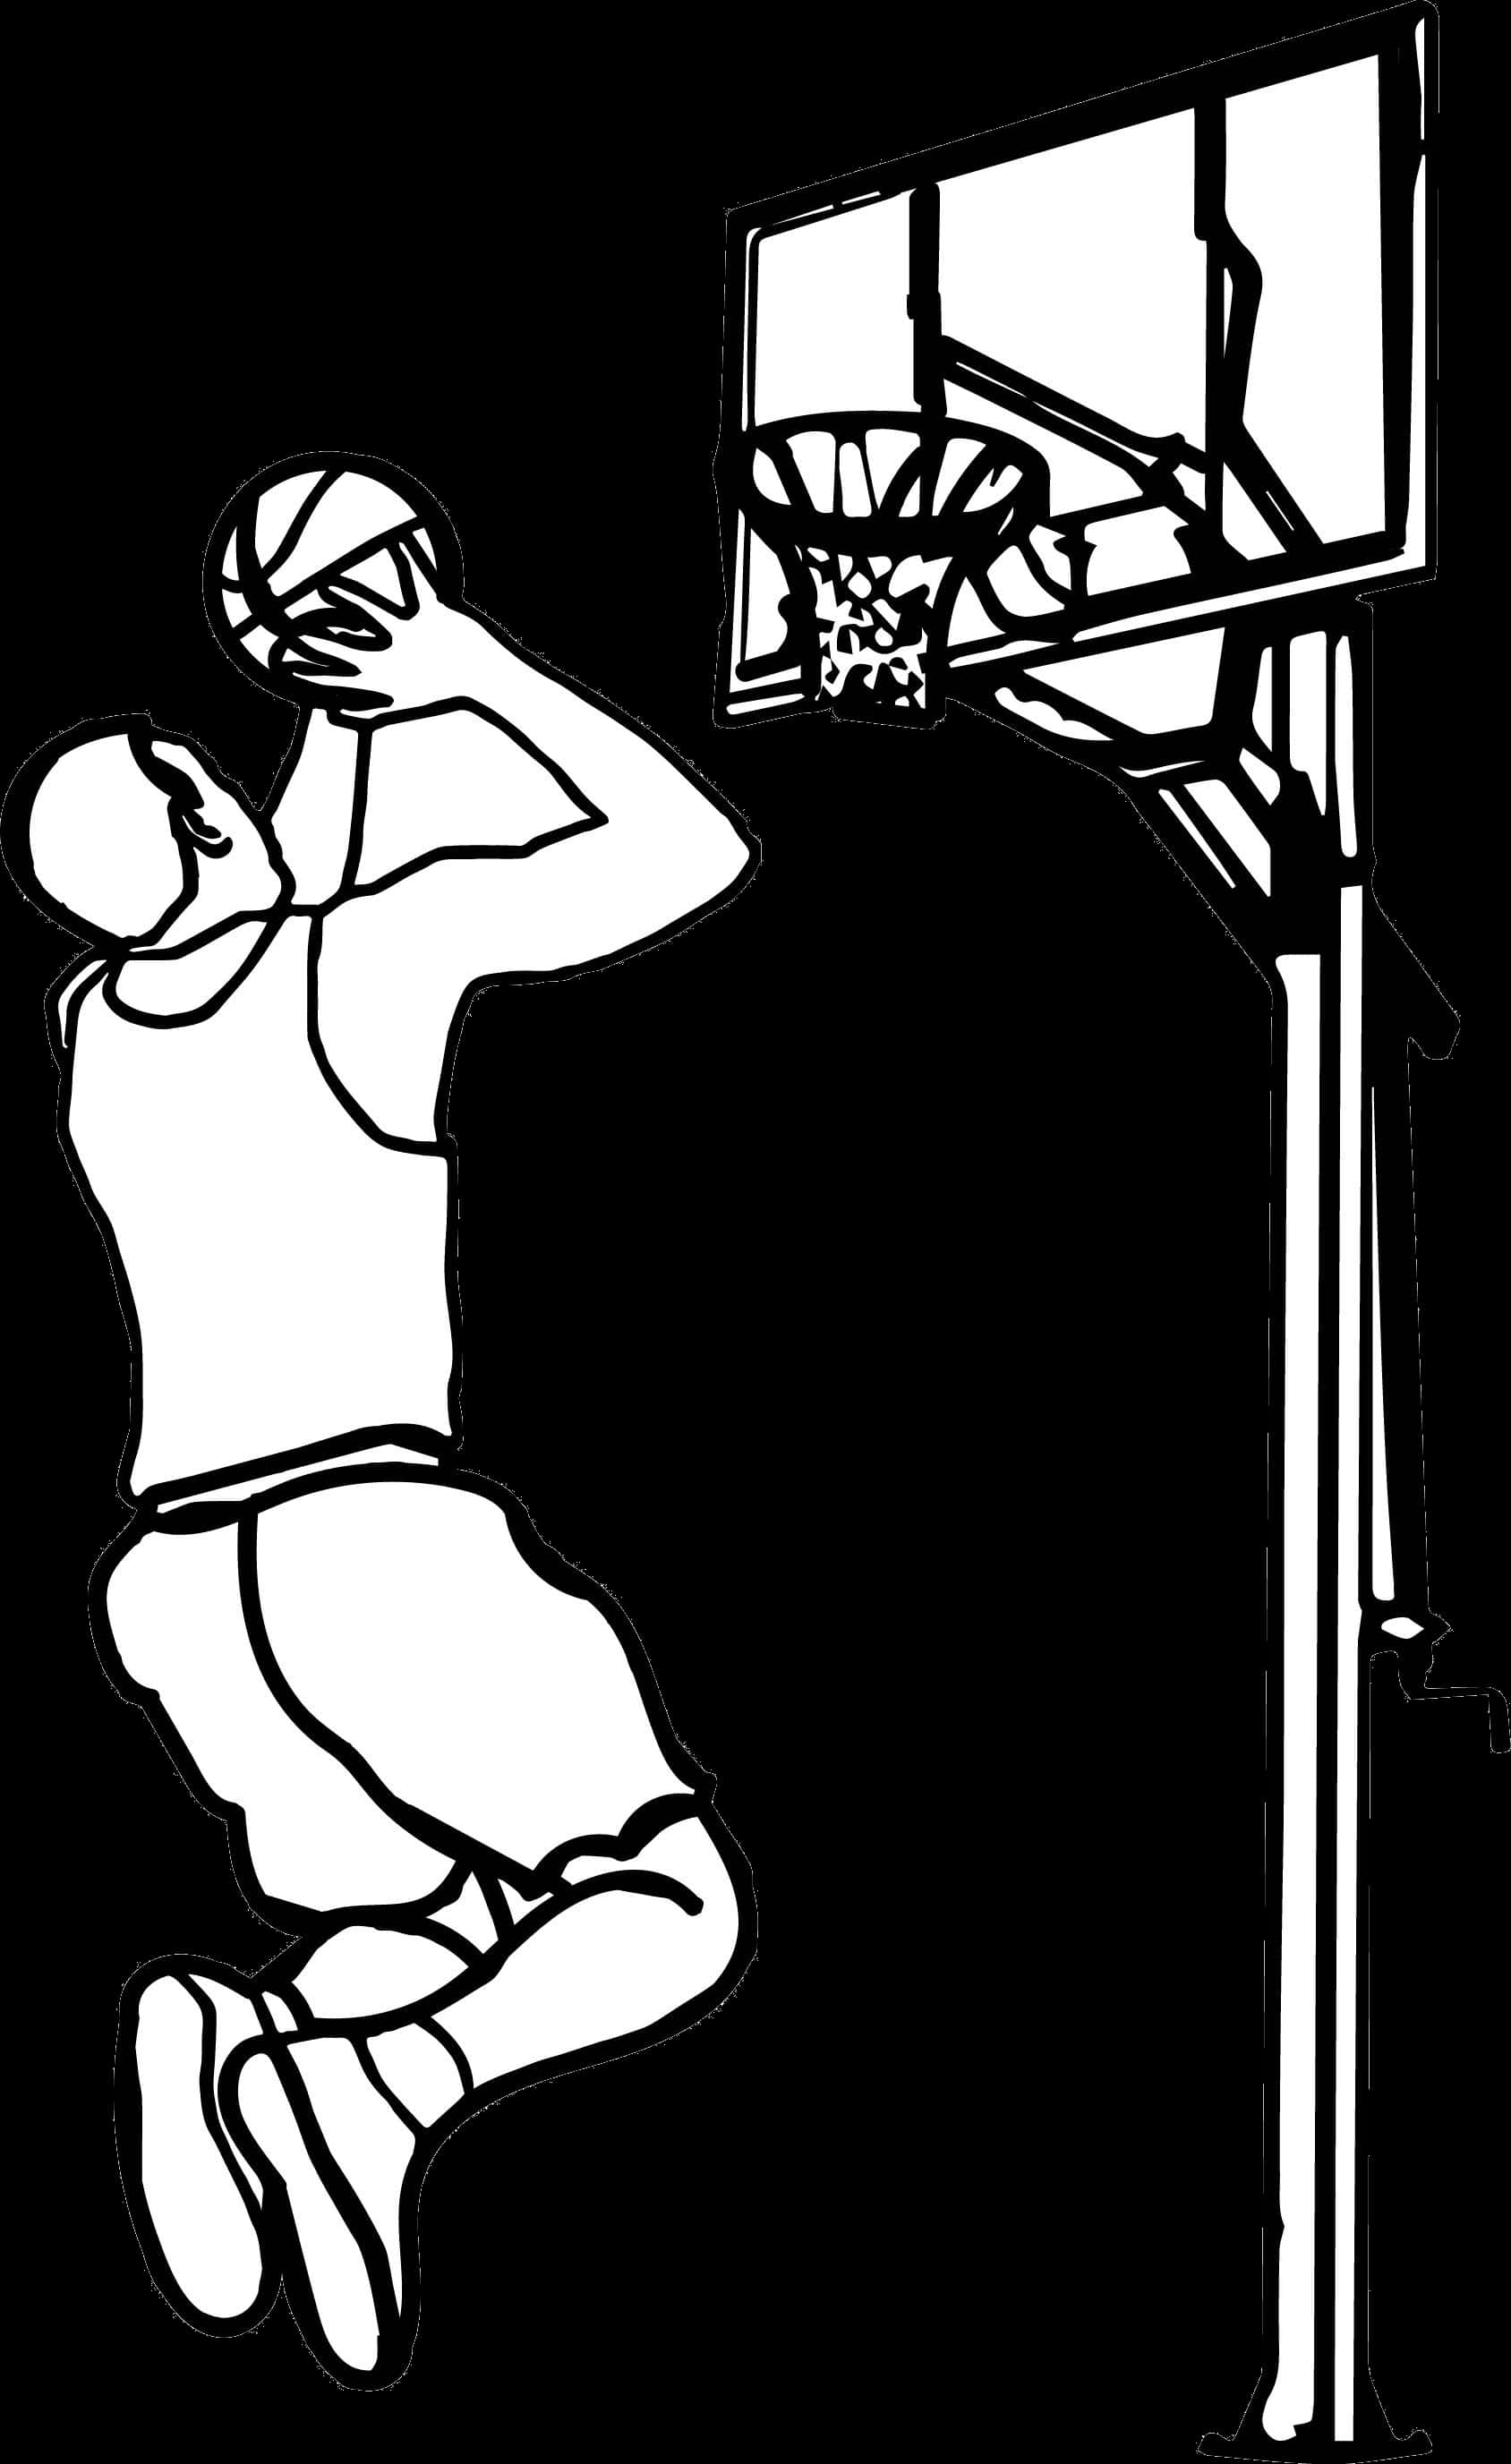 Basketball Outline Playing Clipart The Cliparts Play - Playing Basketball Clipart Black And White, Hd Png Download